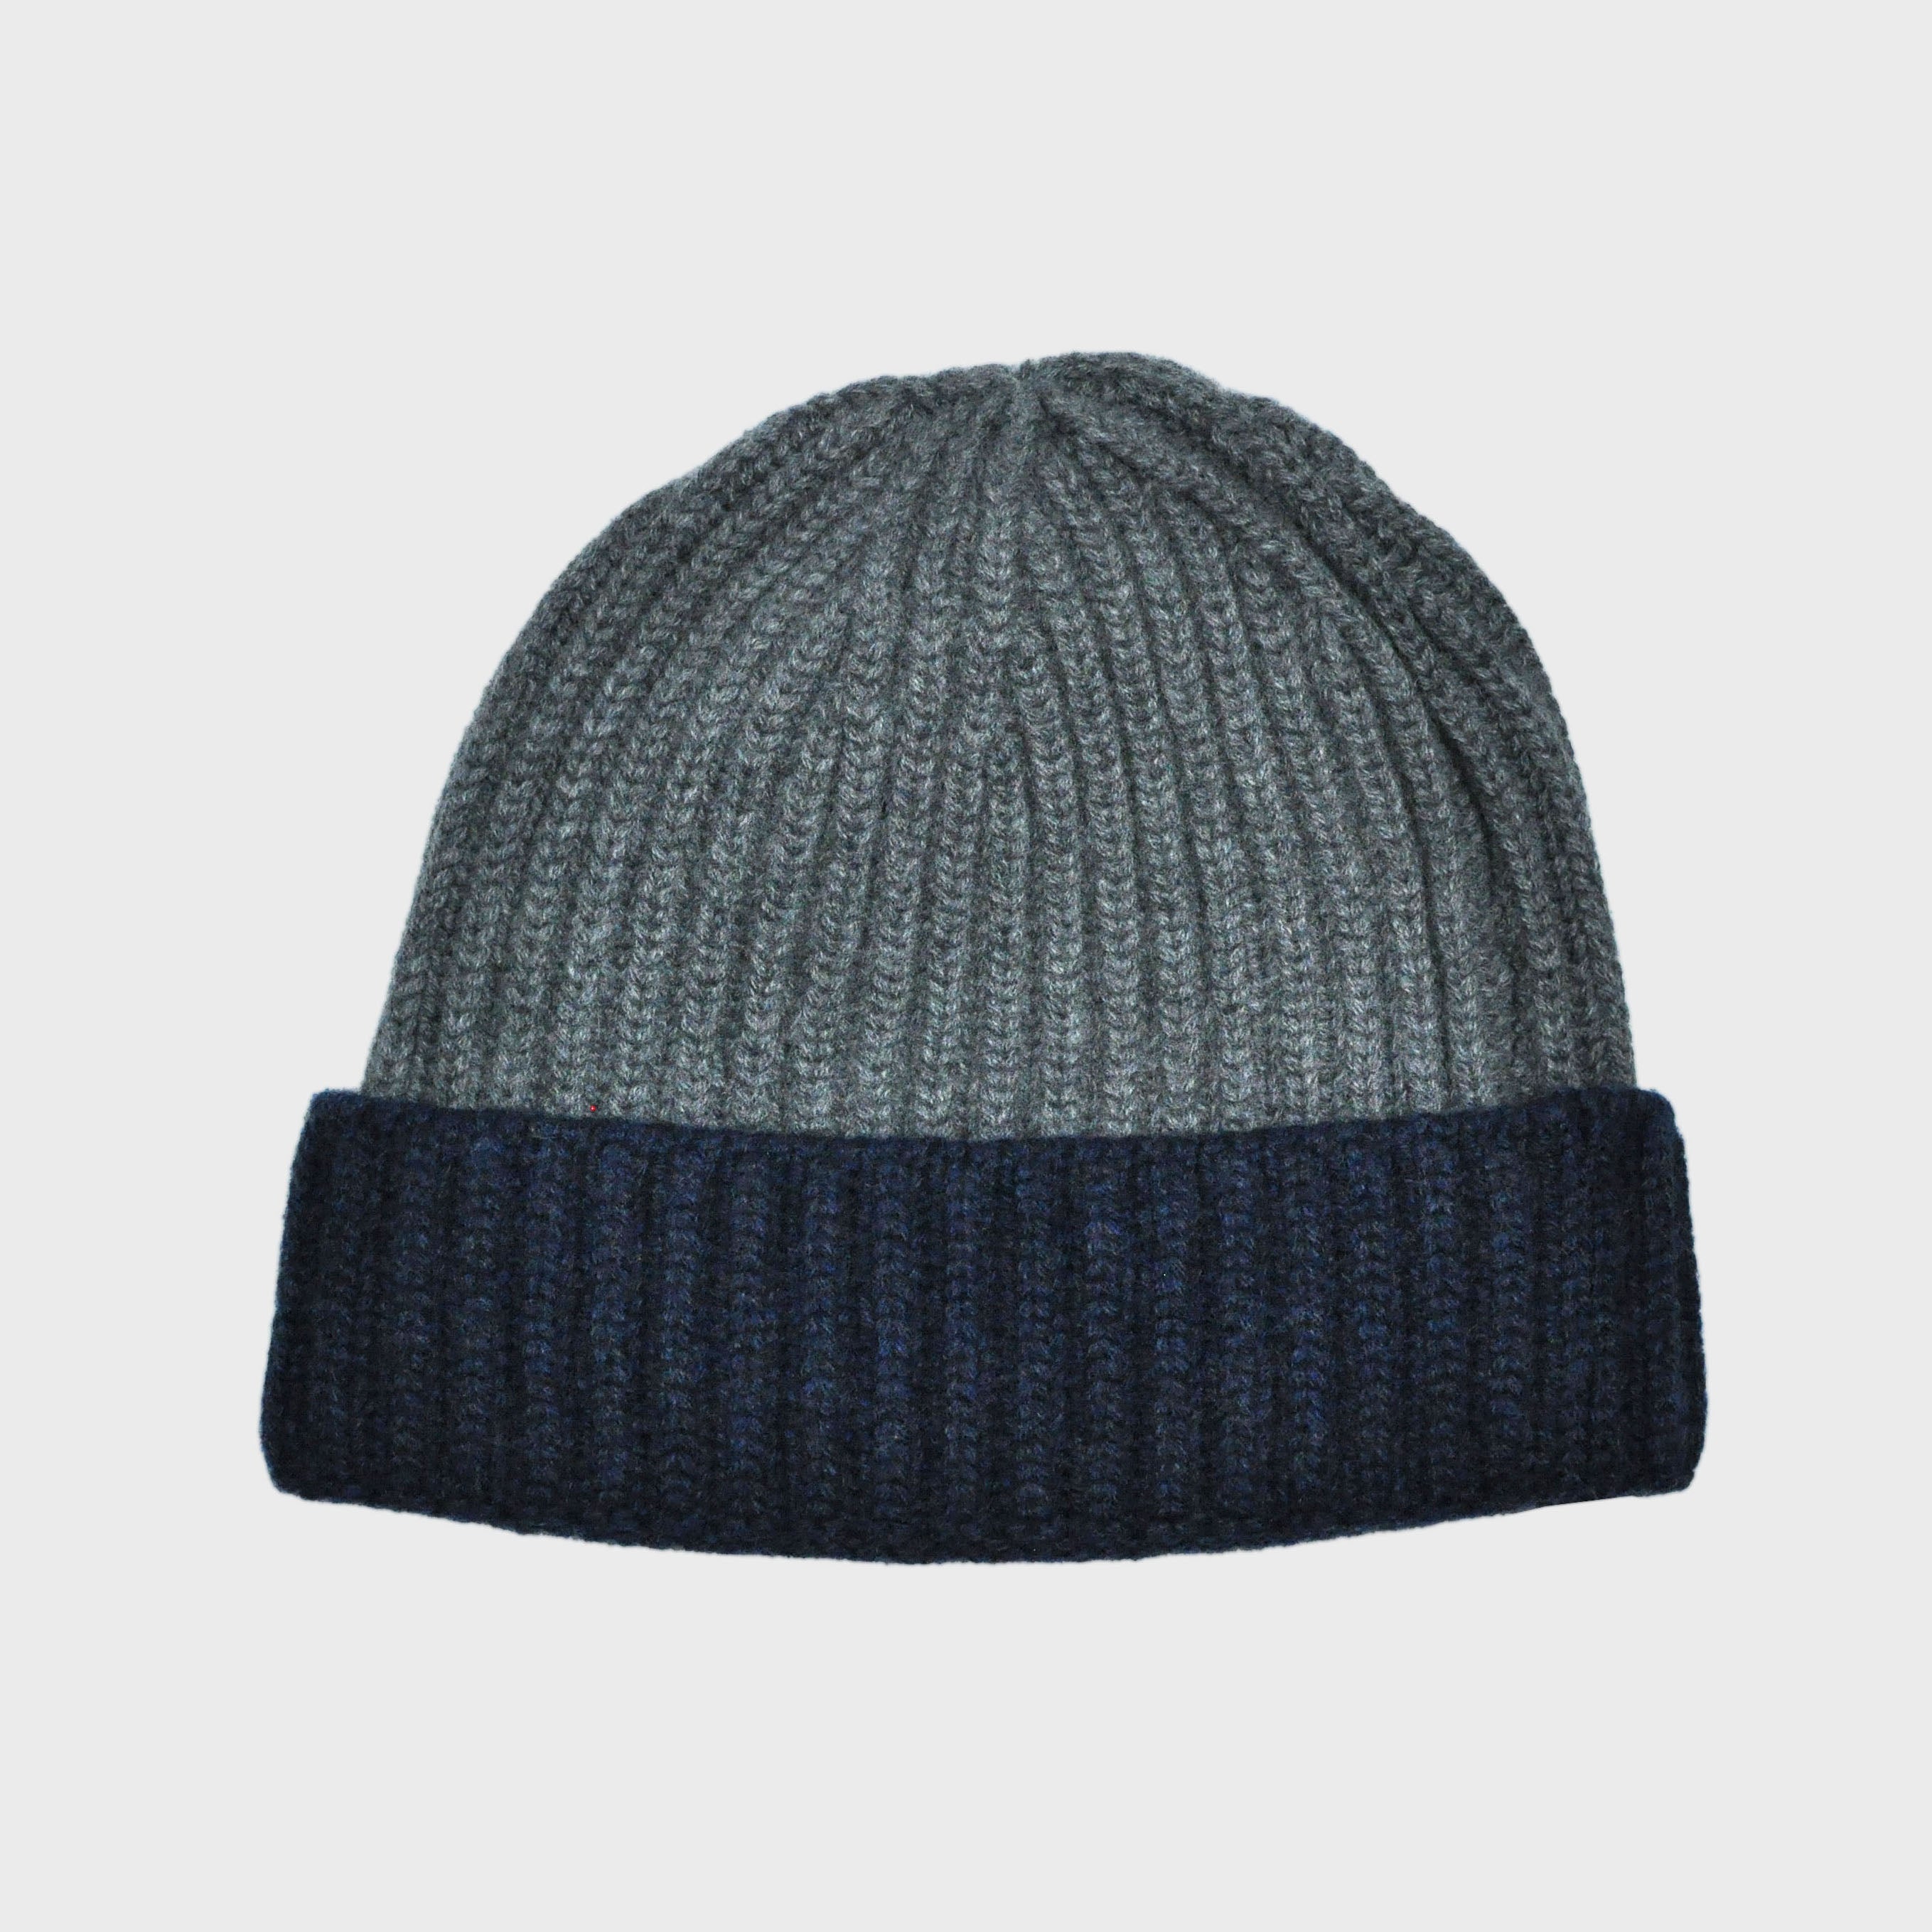 Four Ply Cashmere Winter Beanie in Grey & Navy